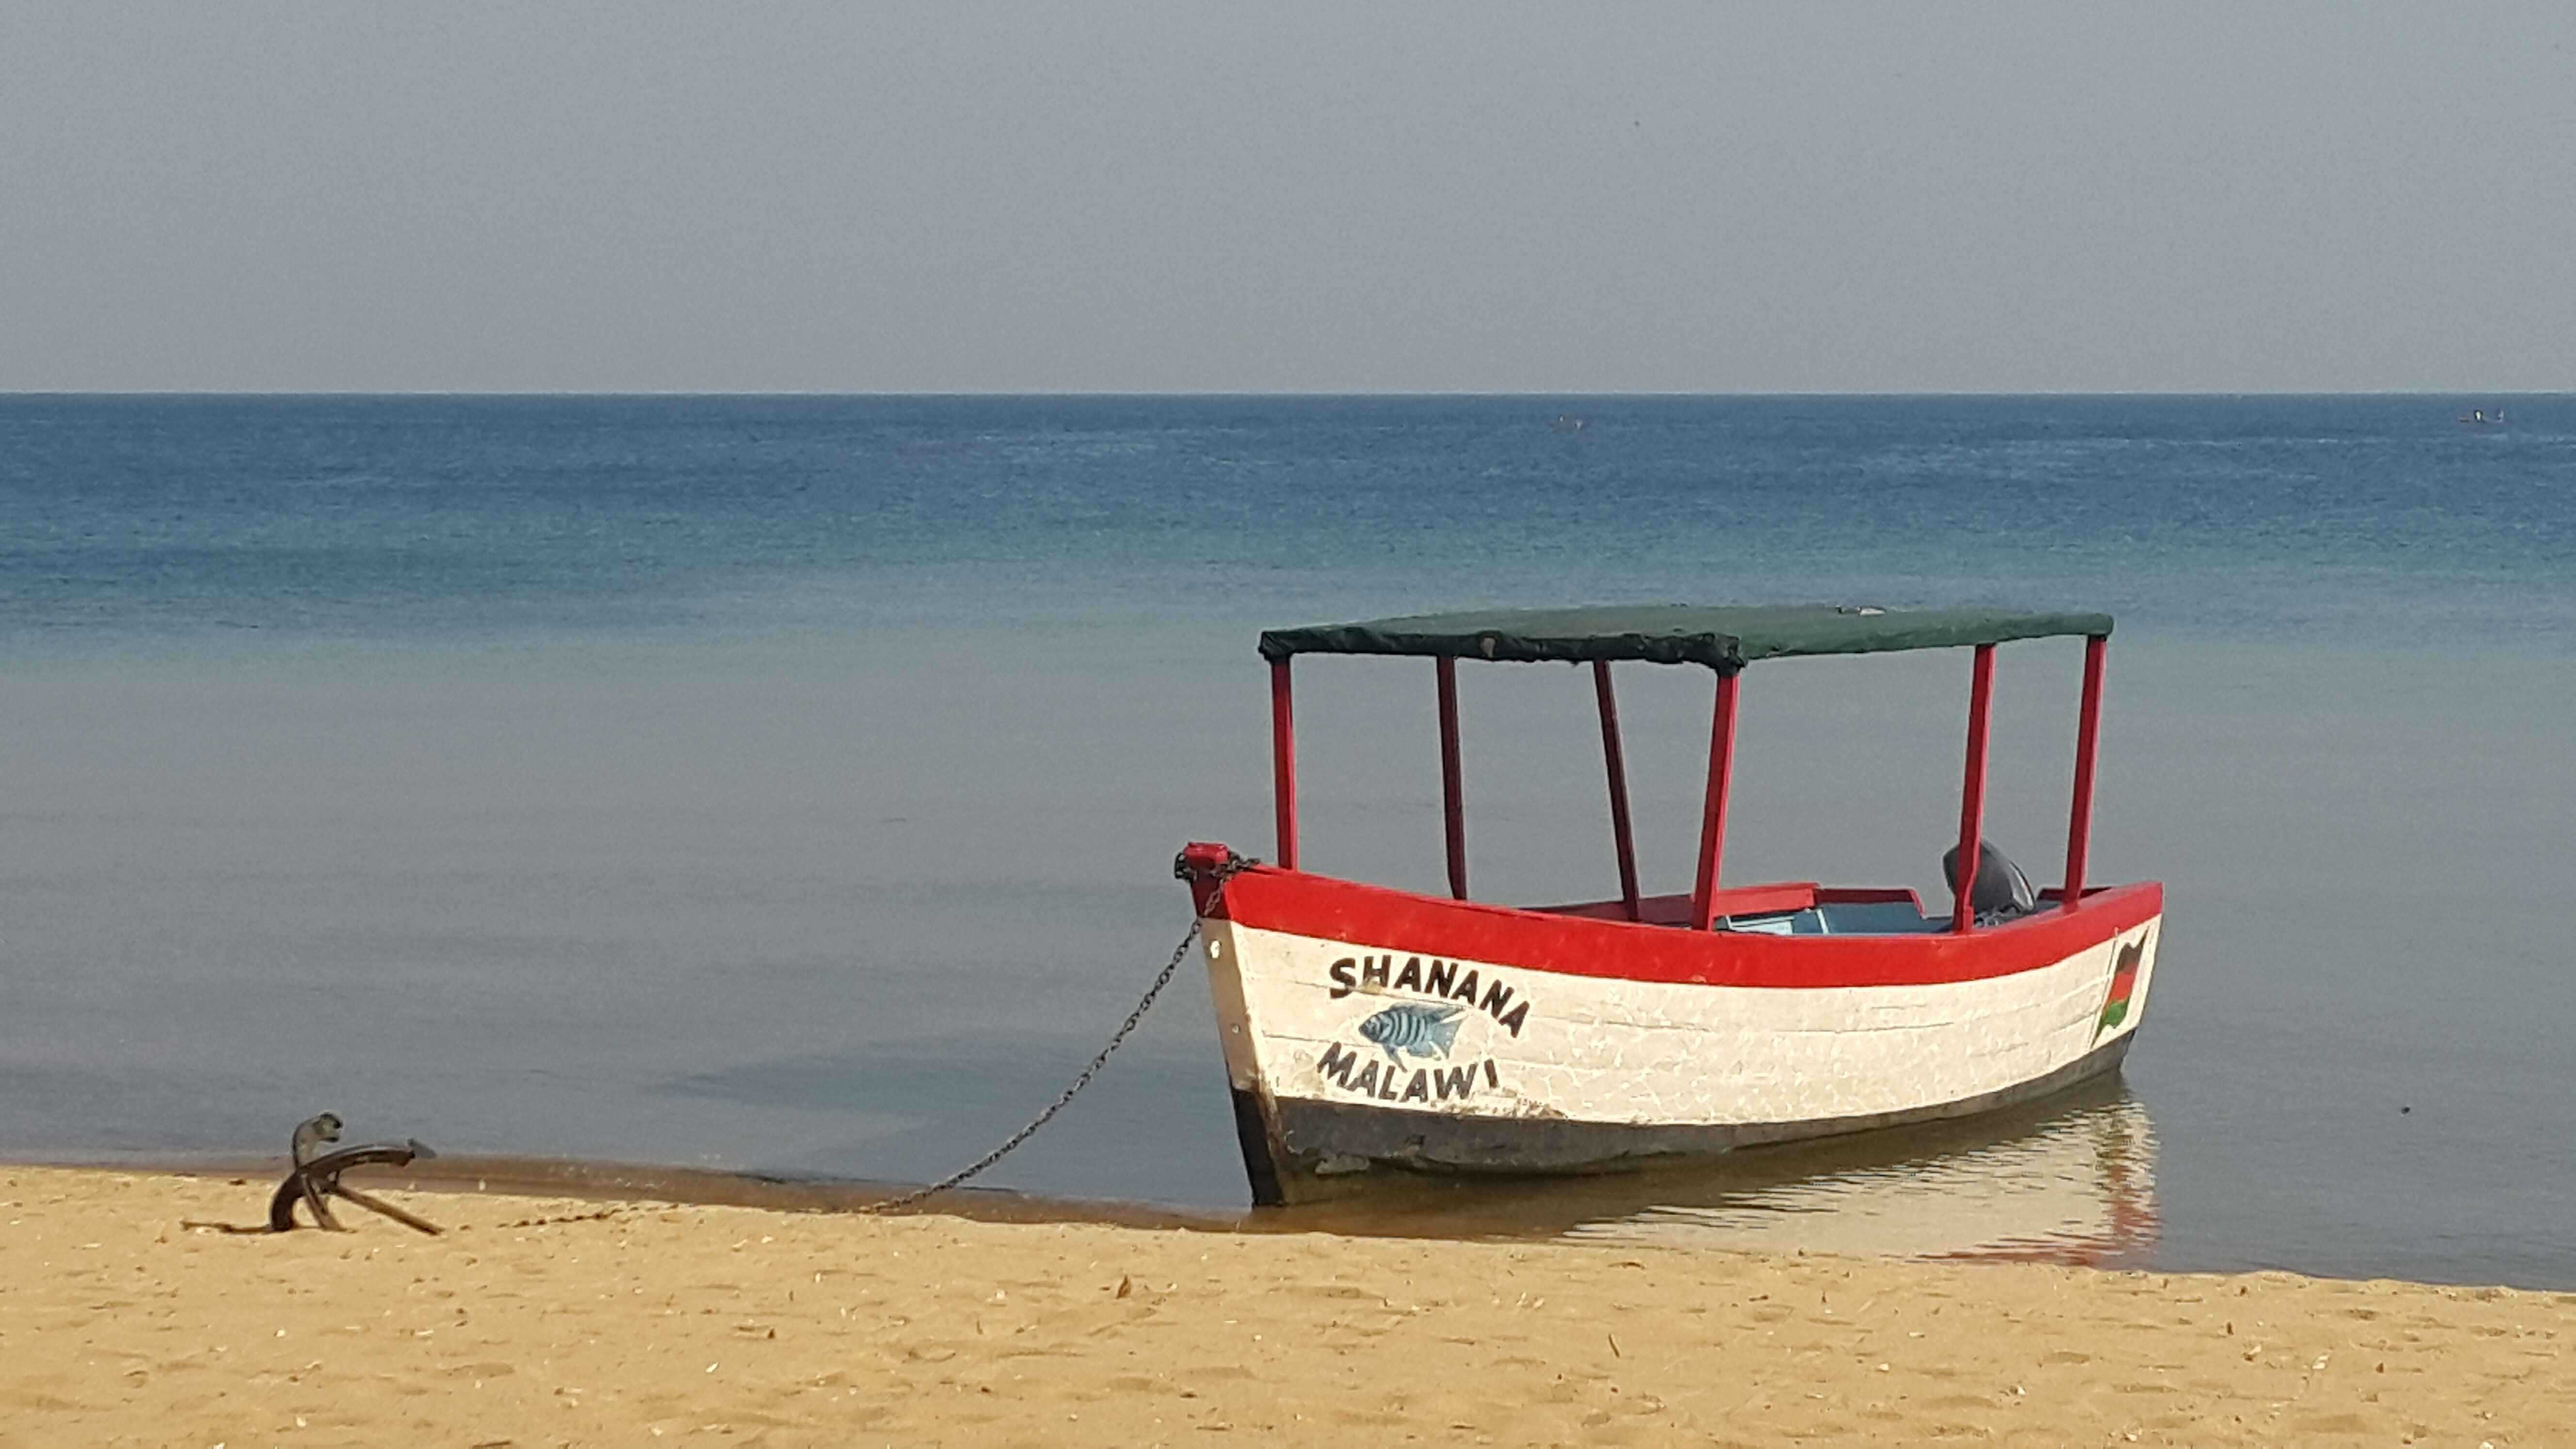 Learn riddles and practice Chichewa at the beach on the shores of Lake Malawi? Picture from the bar at Fat Monkeys lodge, Cape Maclear.